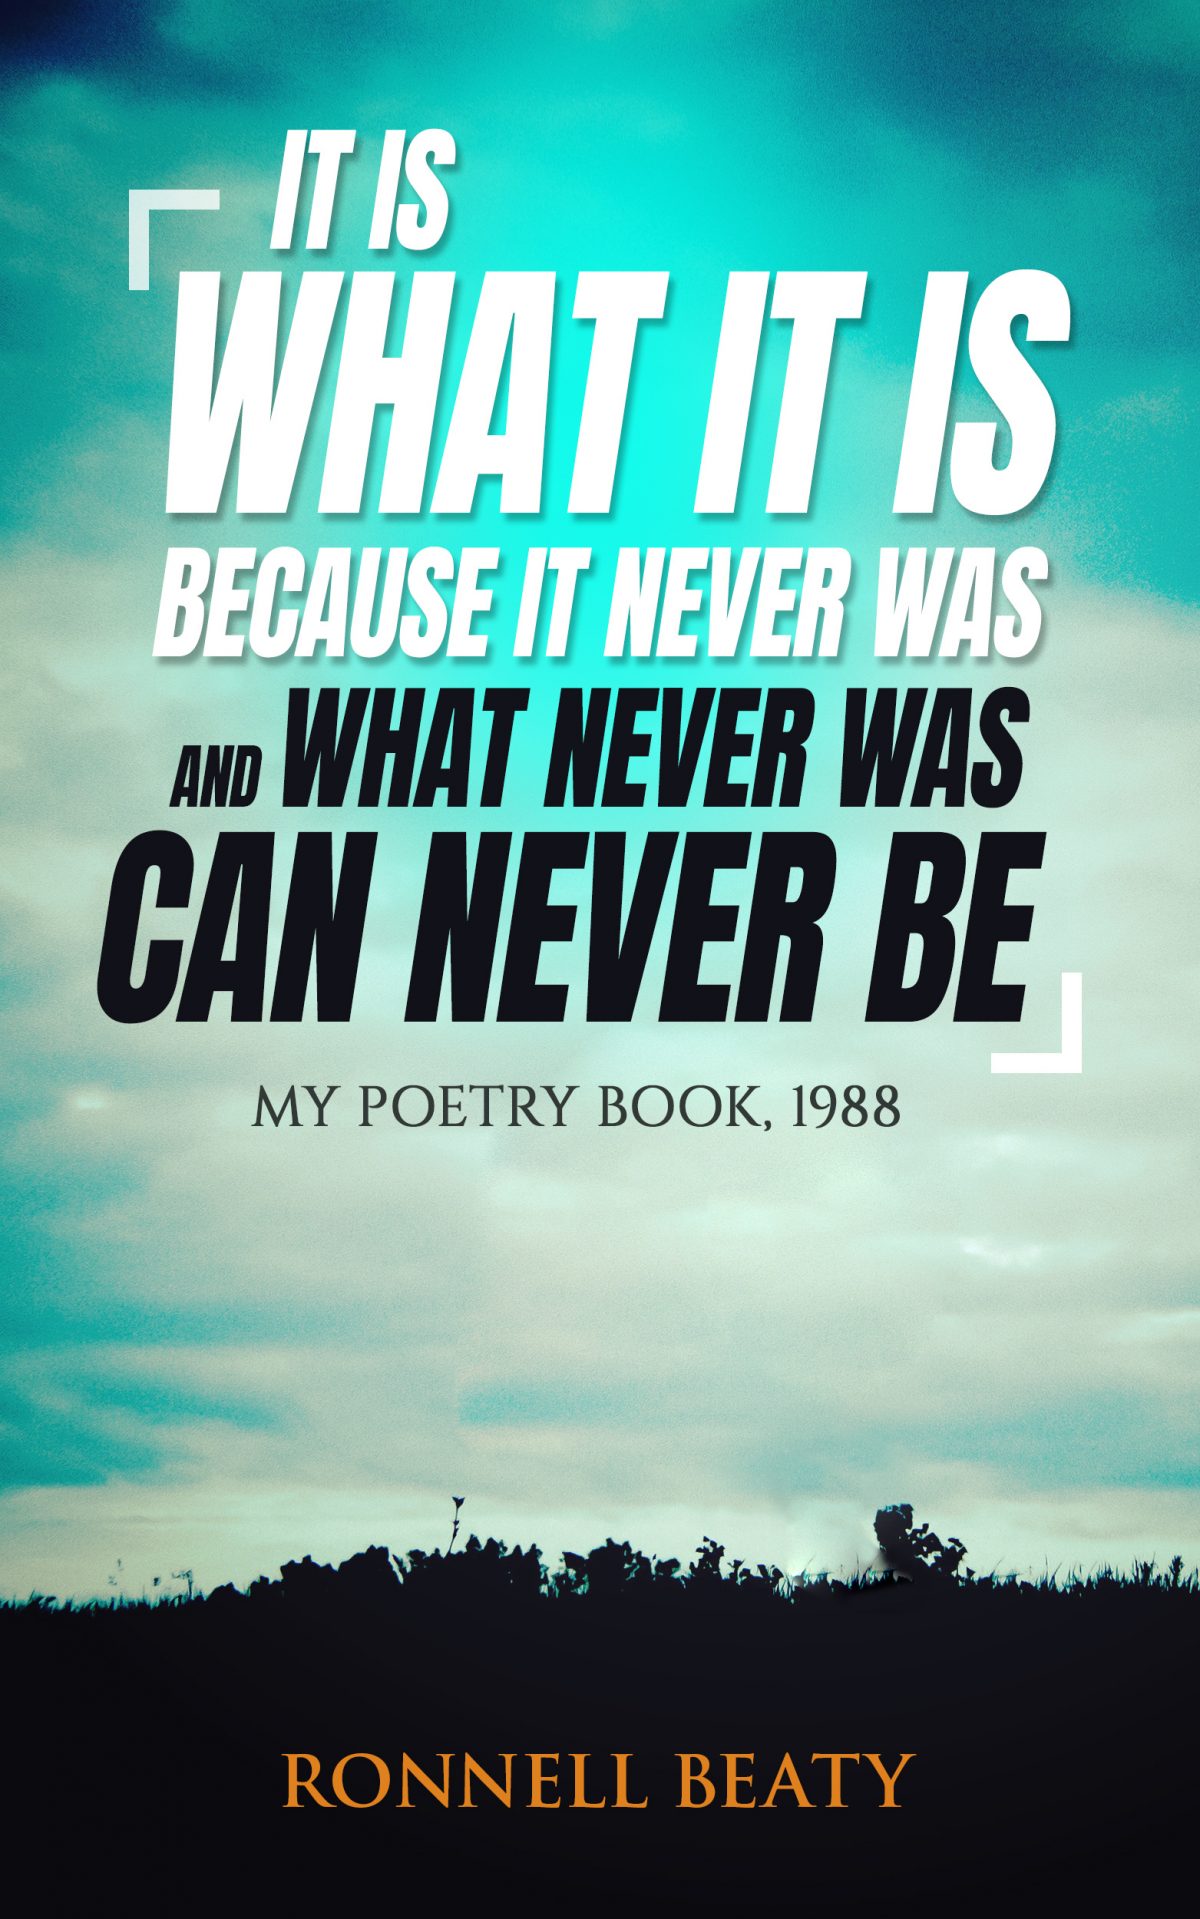 What Never Was, Can Never Be: Poetry